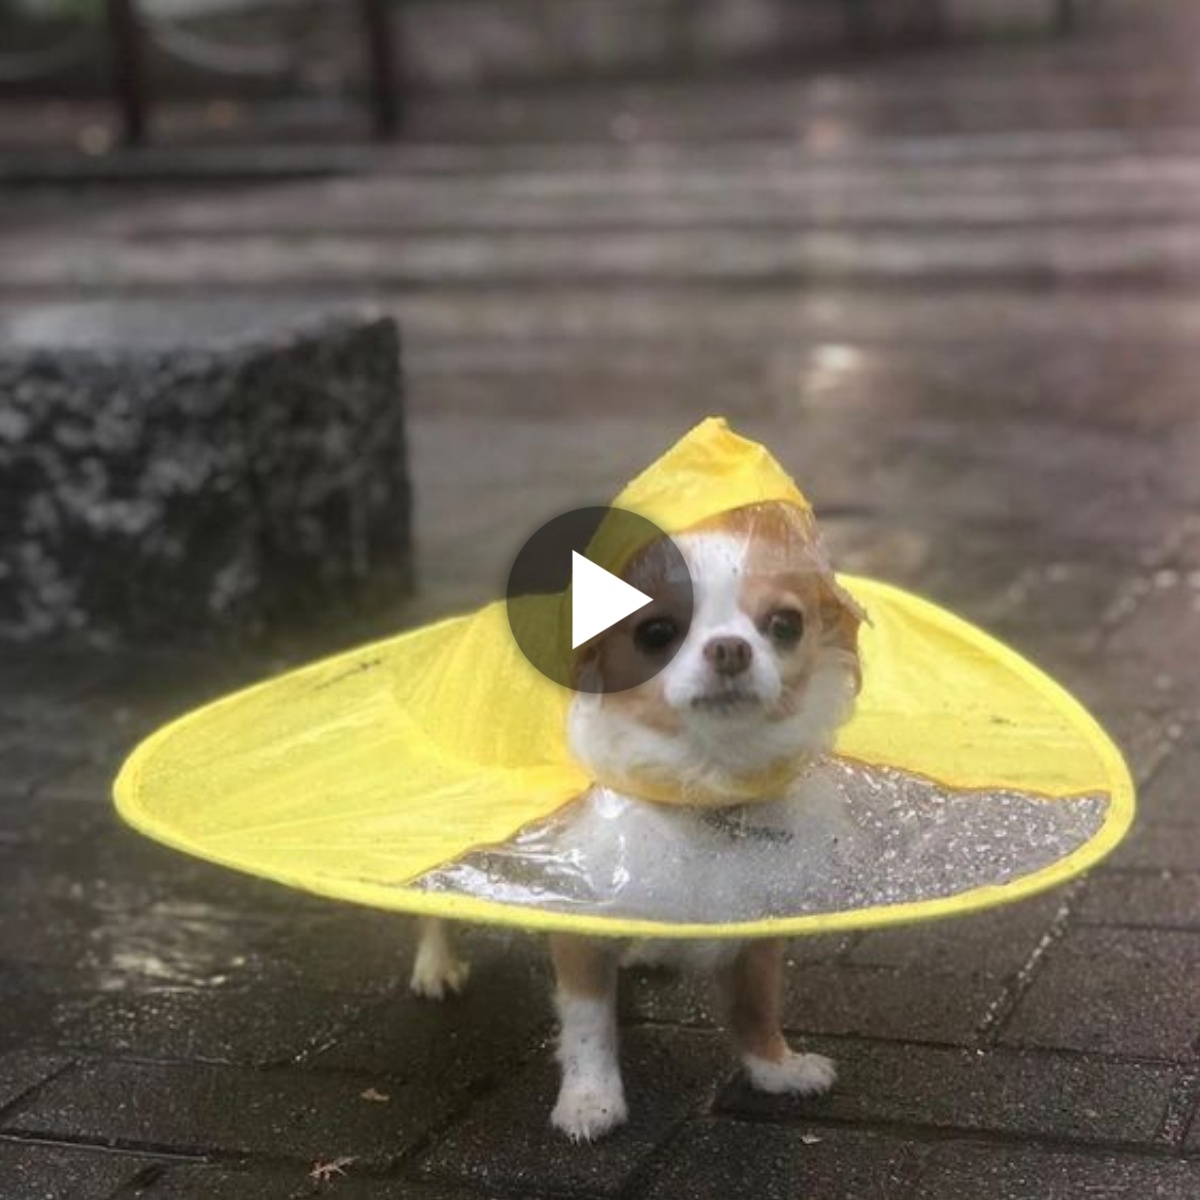 This is A Adorable Video: Stylish Chihuahua Makes a Splash in the Cutest Rain Coat During Walks quickly spread across social media! ????????????